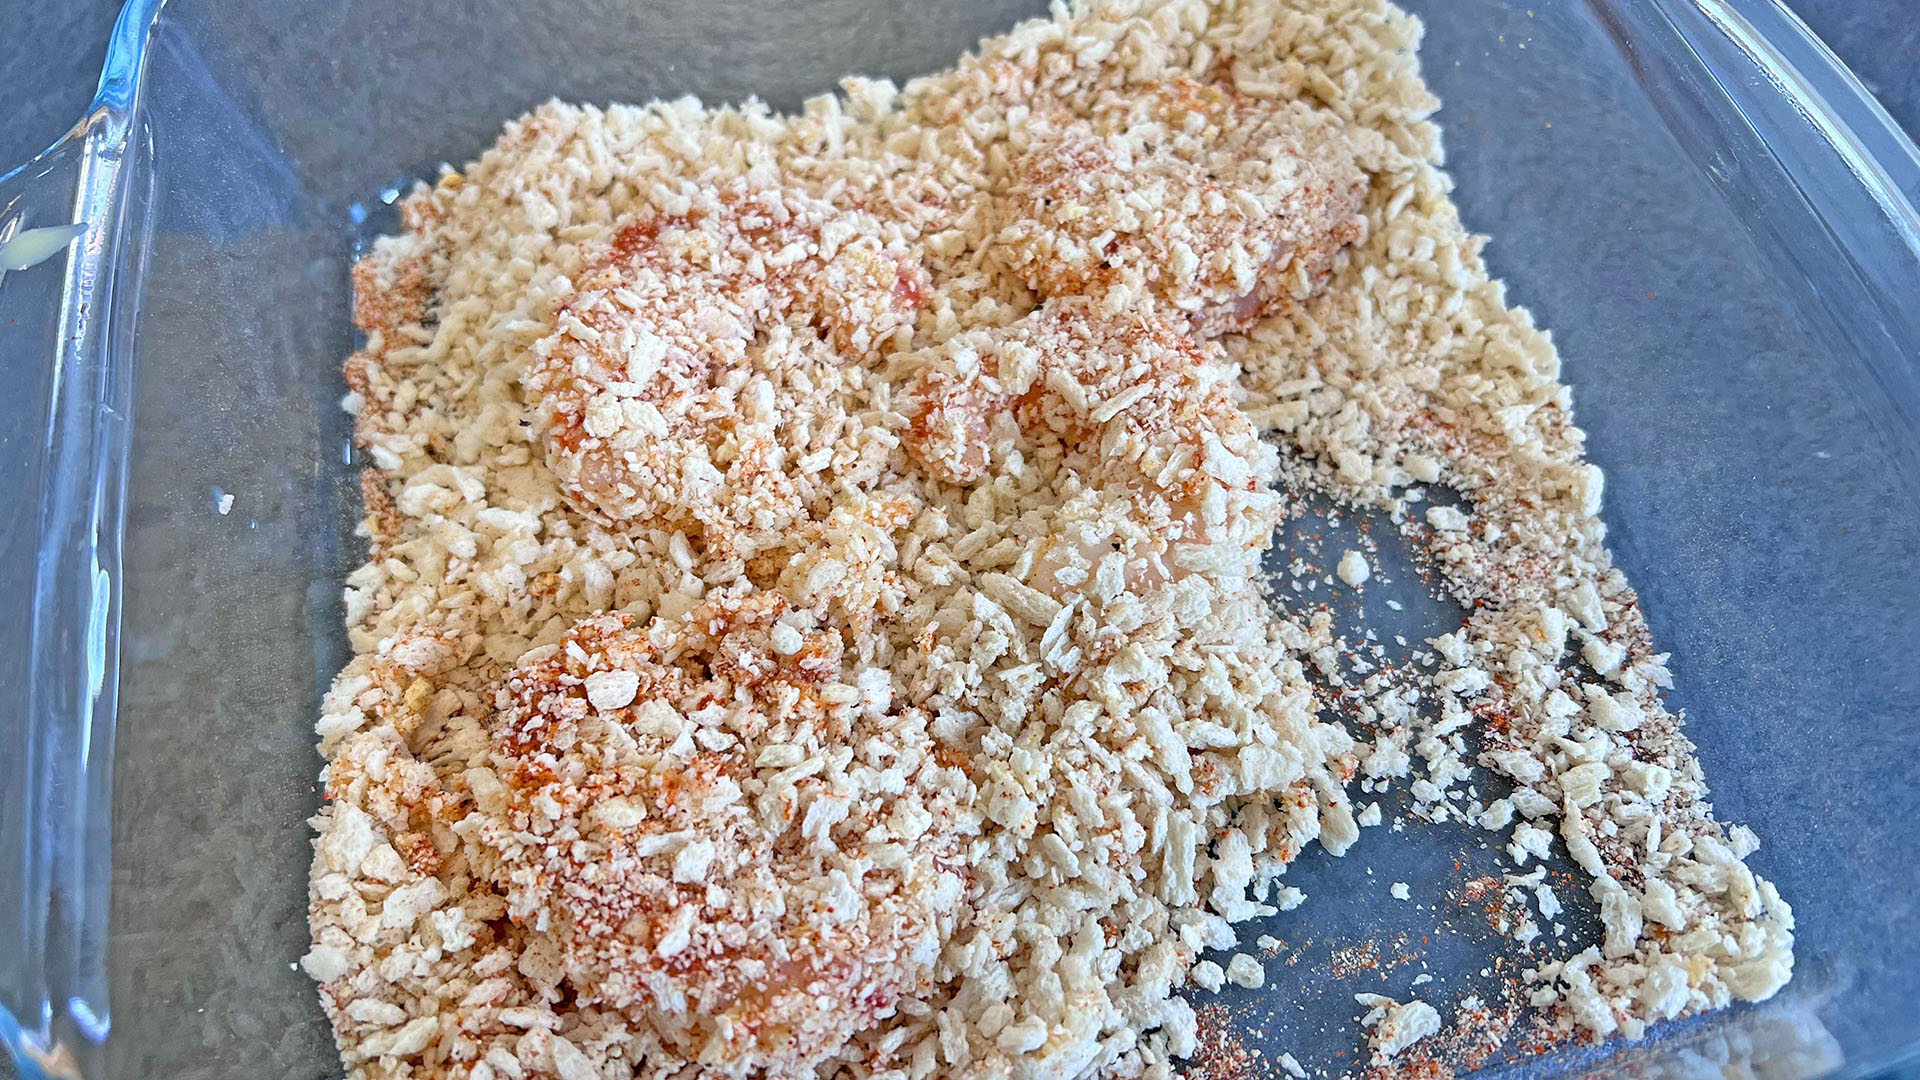 Raw shrimp being rolled in crispy coating